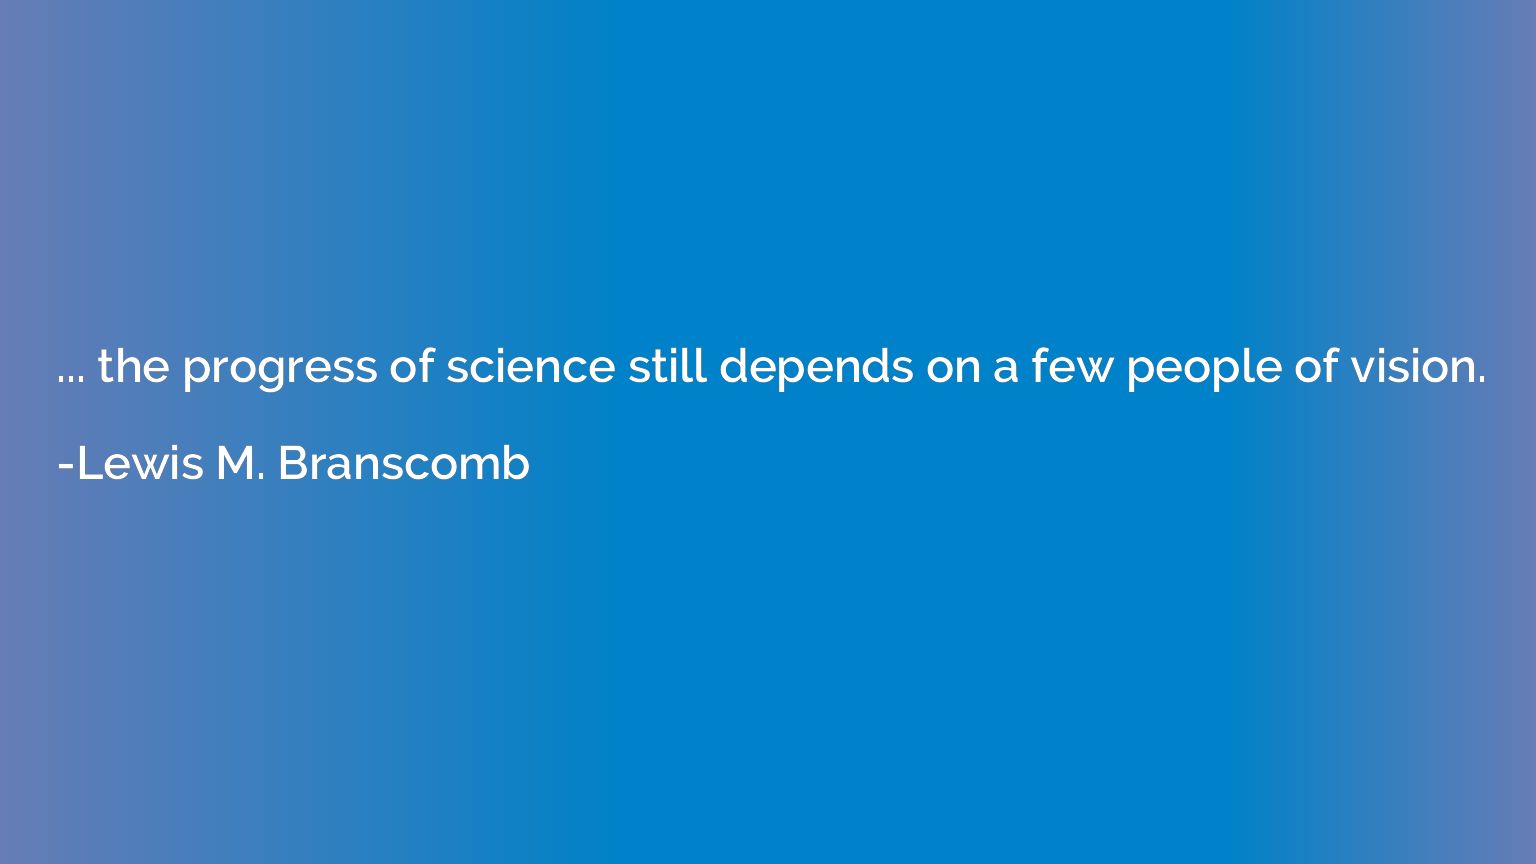 ... the progress of science still depends on a few people of